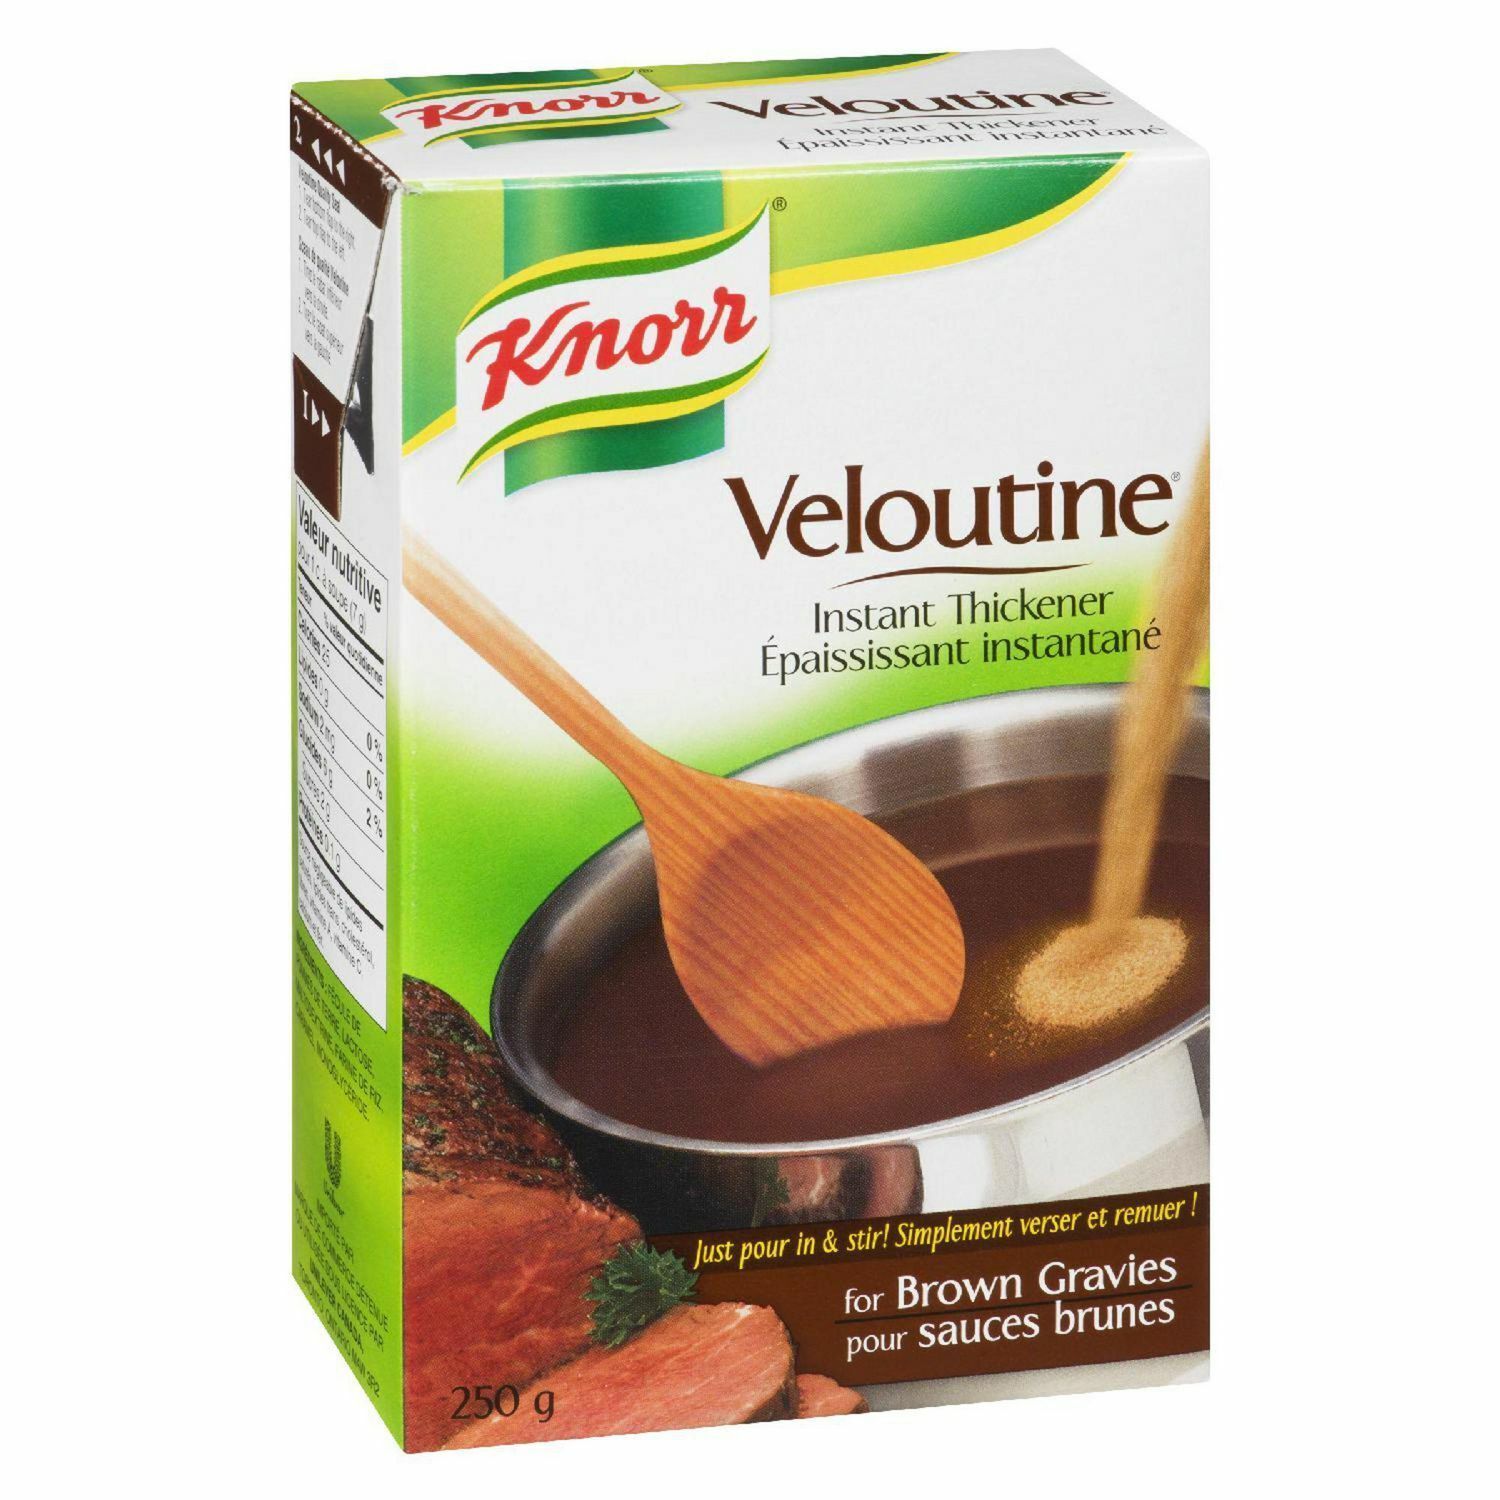 Primary image for 3 X Knorr Veloutine Instant Thickener for Brown Gravies 250g Each -Free Shipping